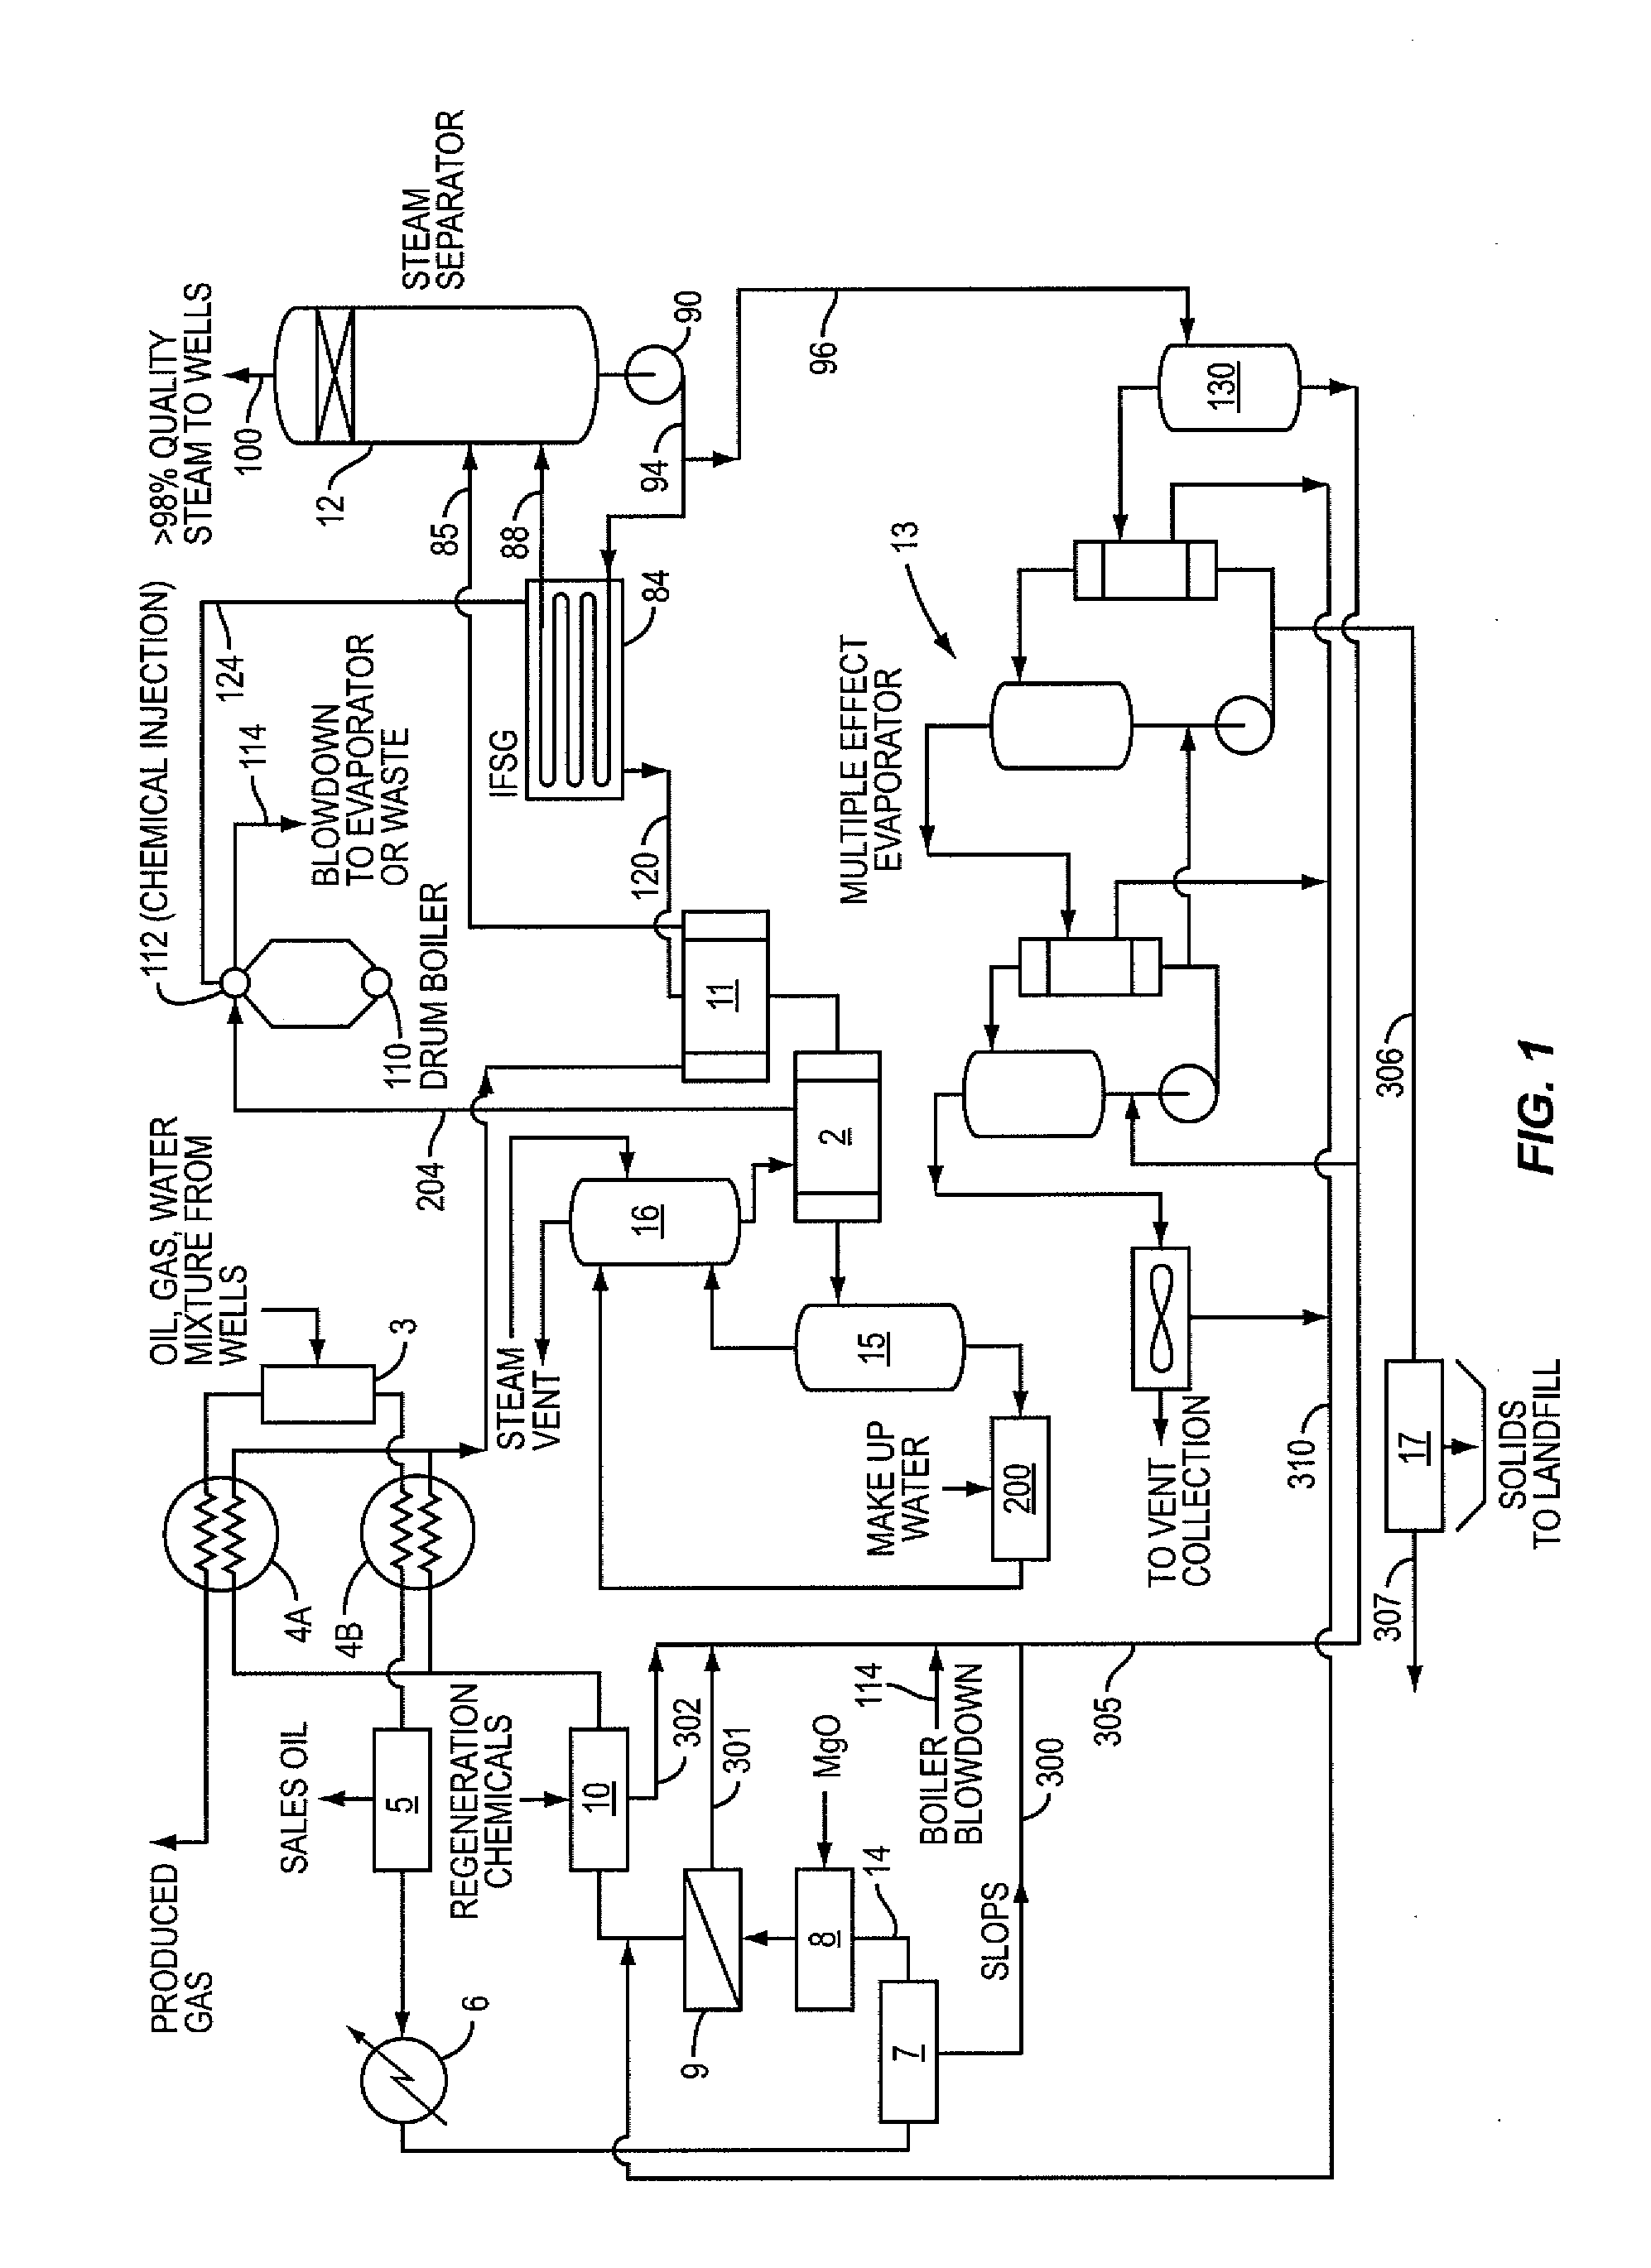 Method and System for Recovering Oil and Generating Steam from Produced Water